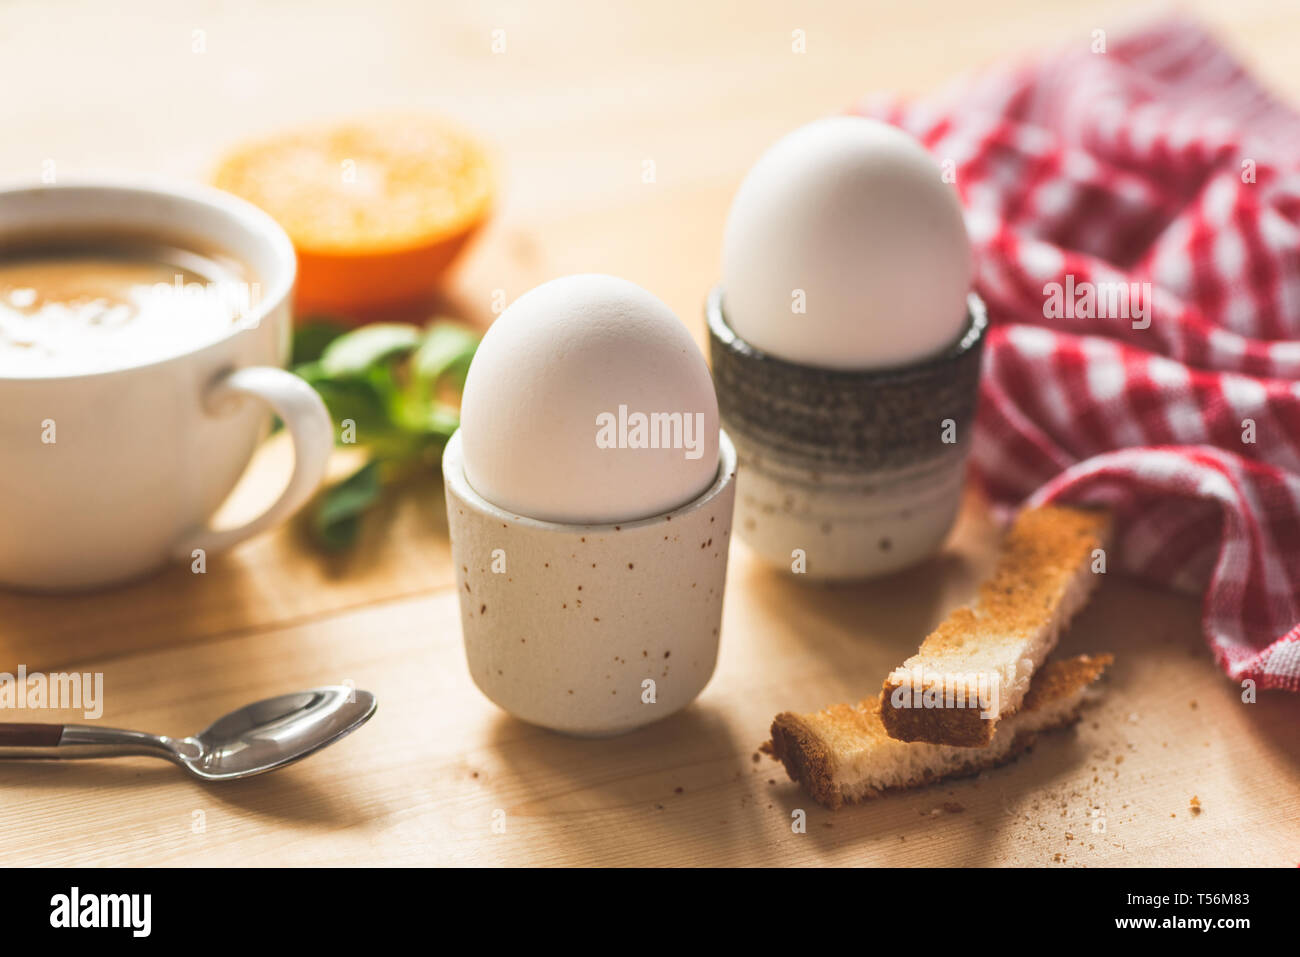 Boiled eggs for breakfast, cup of coffee, toasted bread and orange half. Healthy tasty breakfast on a wooden table. Closeup view, selective focus, ton Stock Photo